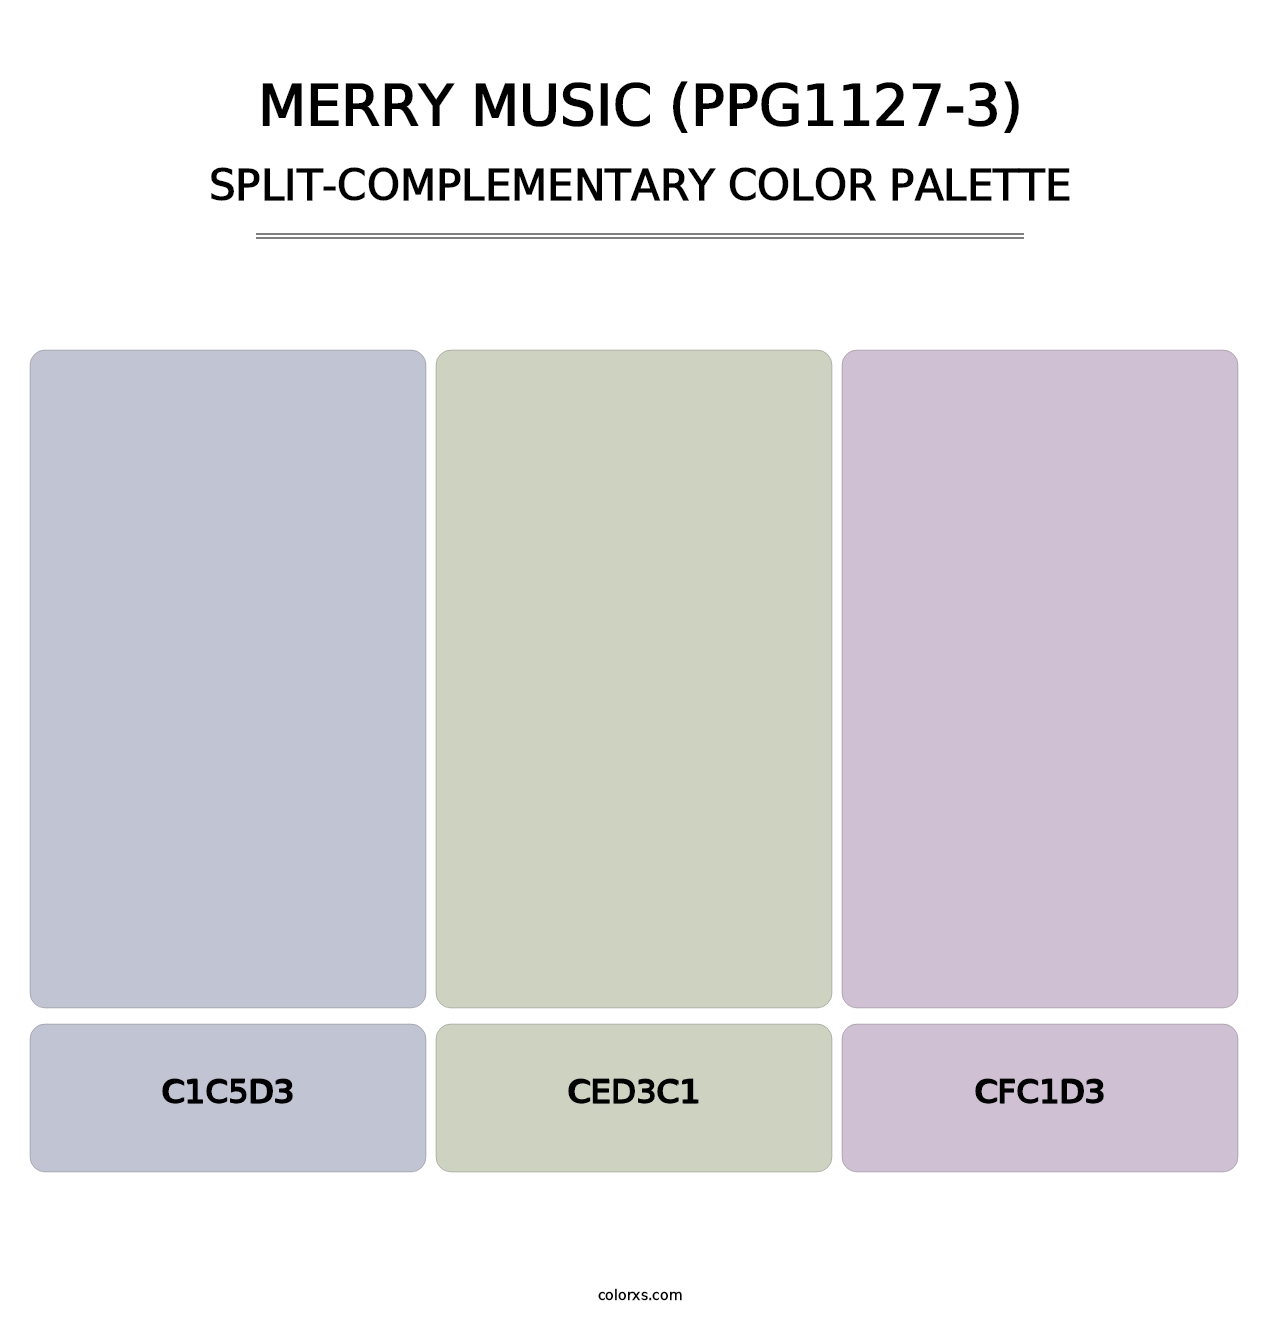 Merry Music (PPG1127-3) - Split-Complementary Color Palette